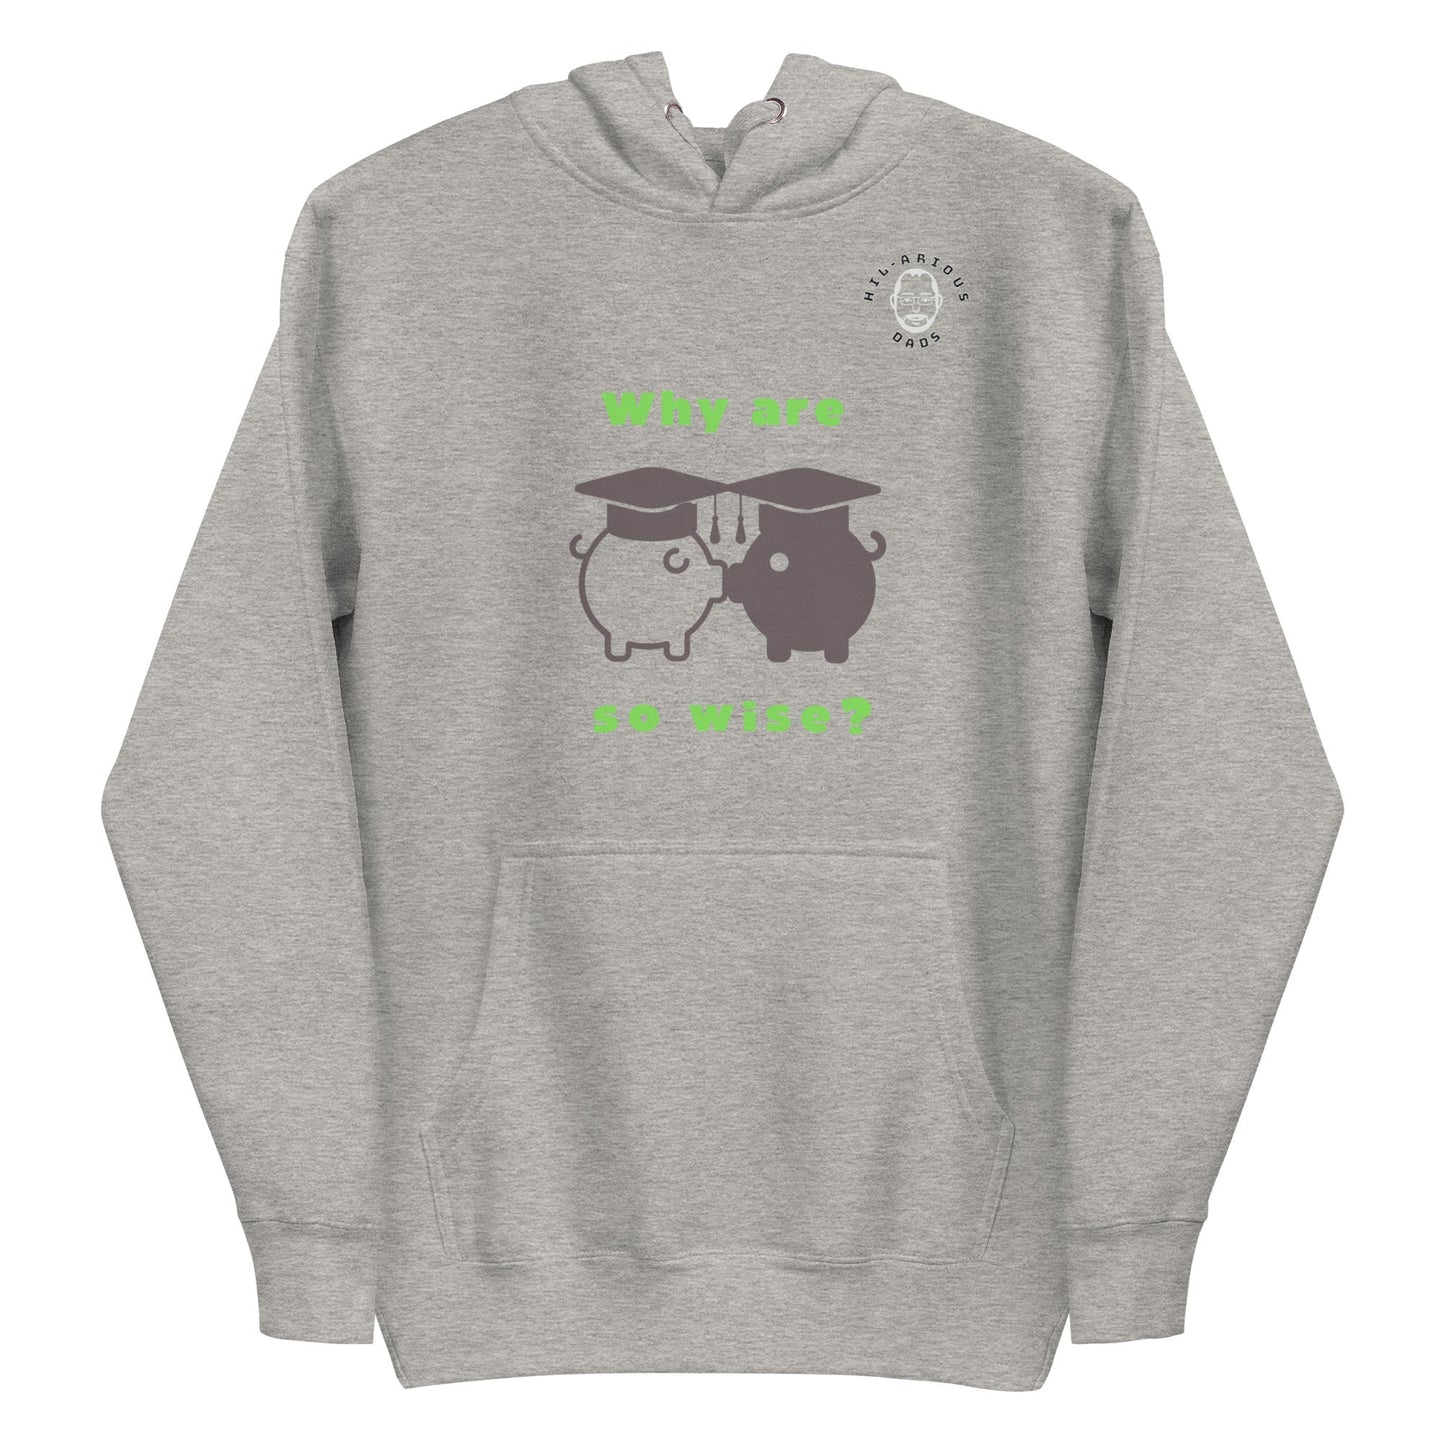 Why are Piggies so wise?-Hoodie - Hil-arious Dads